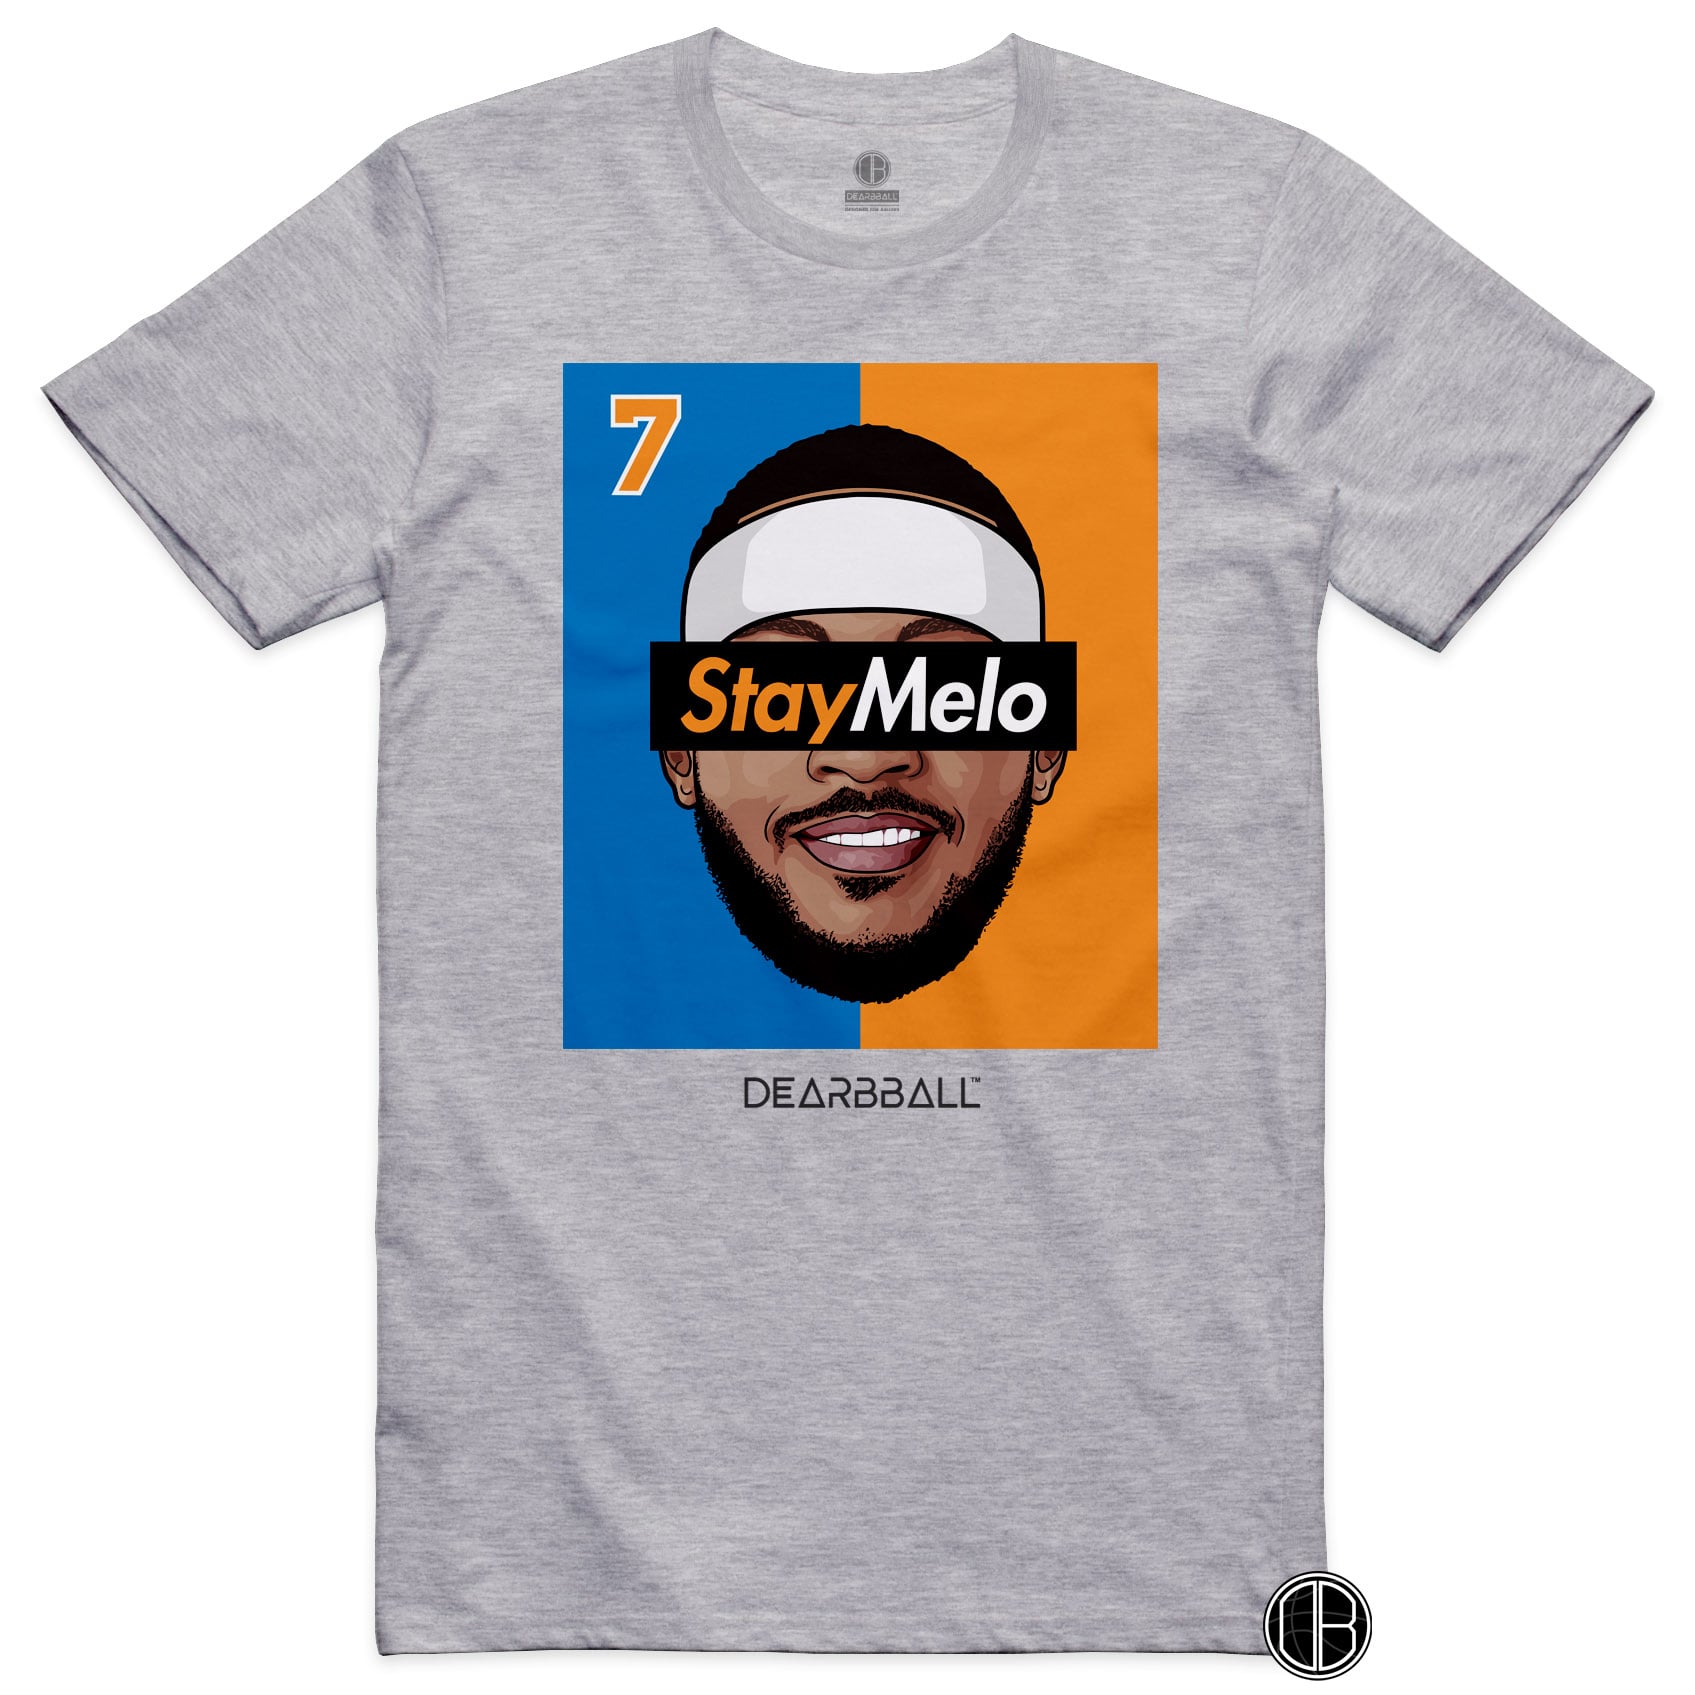 DearBBall T-Shirt - StayMelo 7 NY Edition